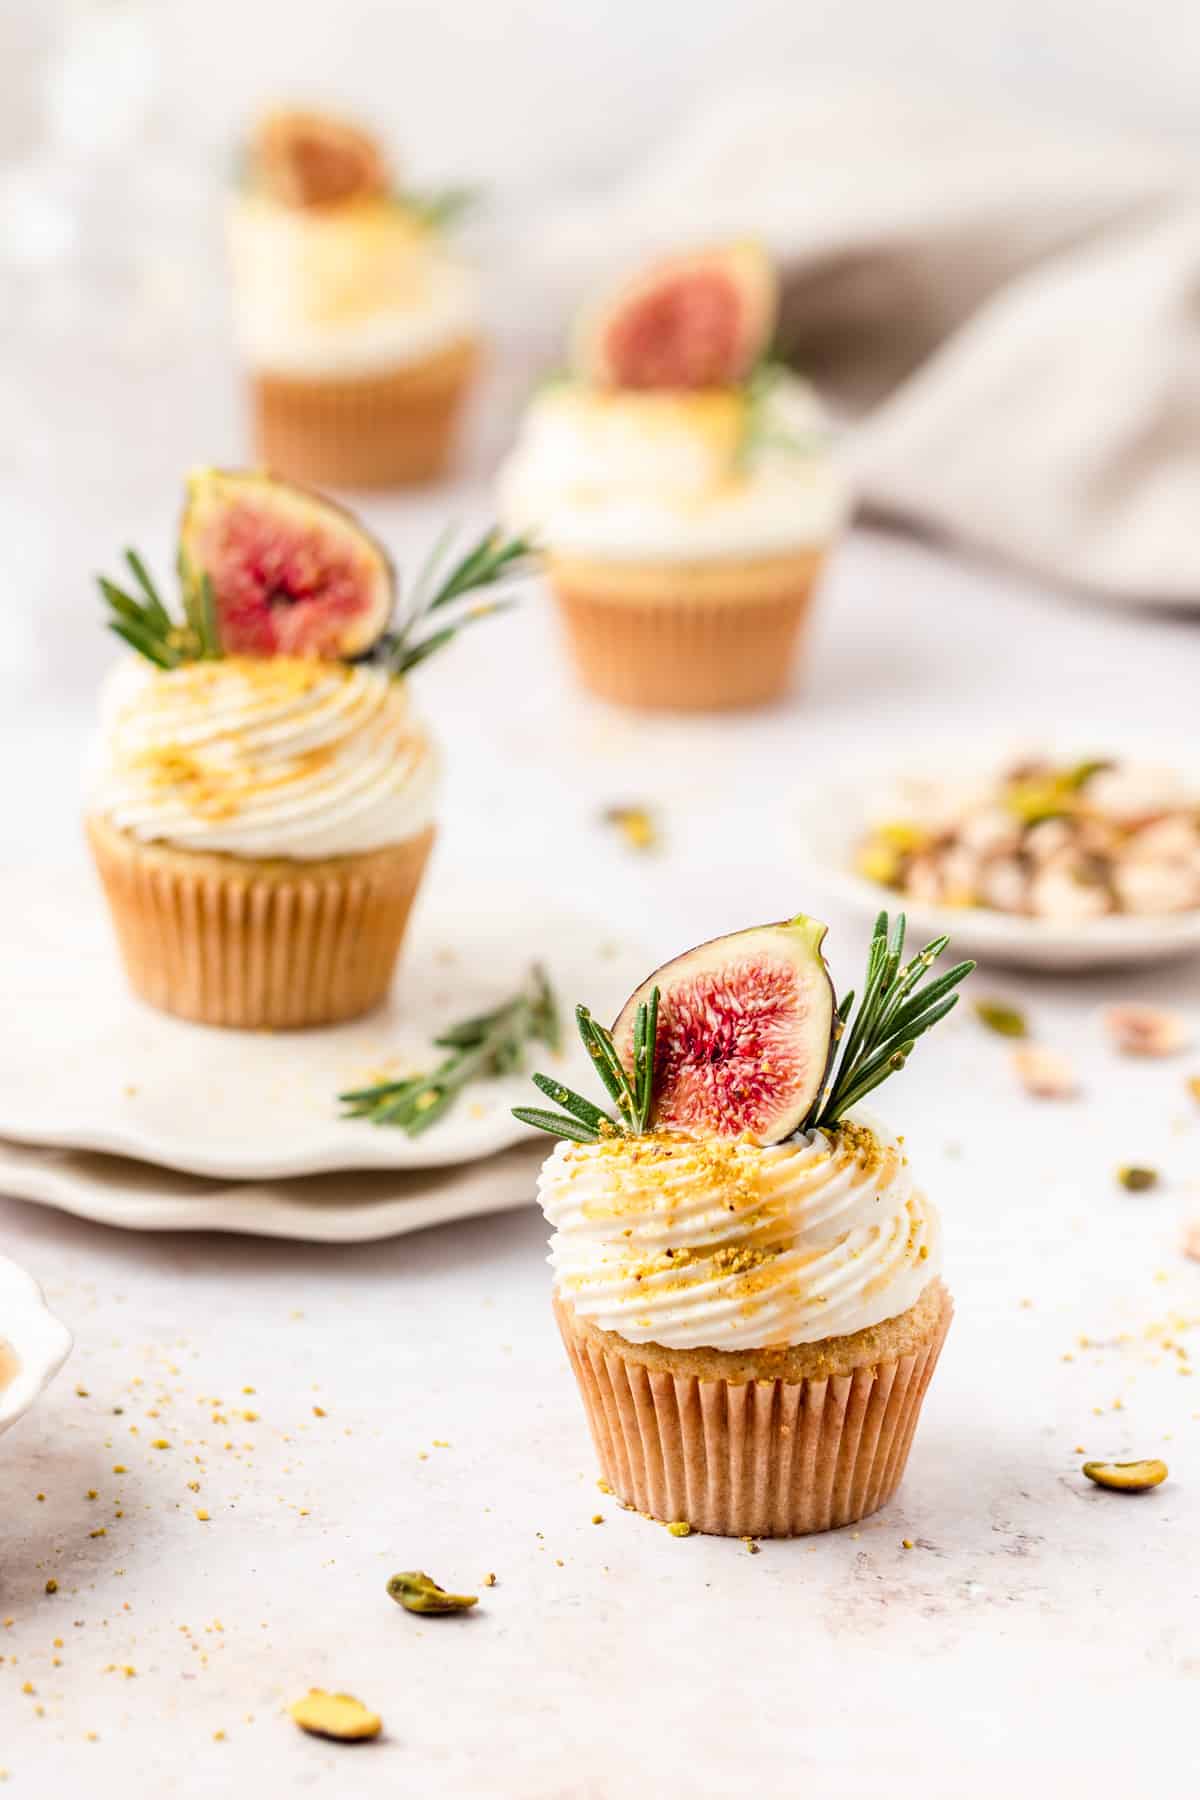 fig olive oil cupcakes topped with mascarpone frosting, fresh figs, ground pistachios, and rosemary.